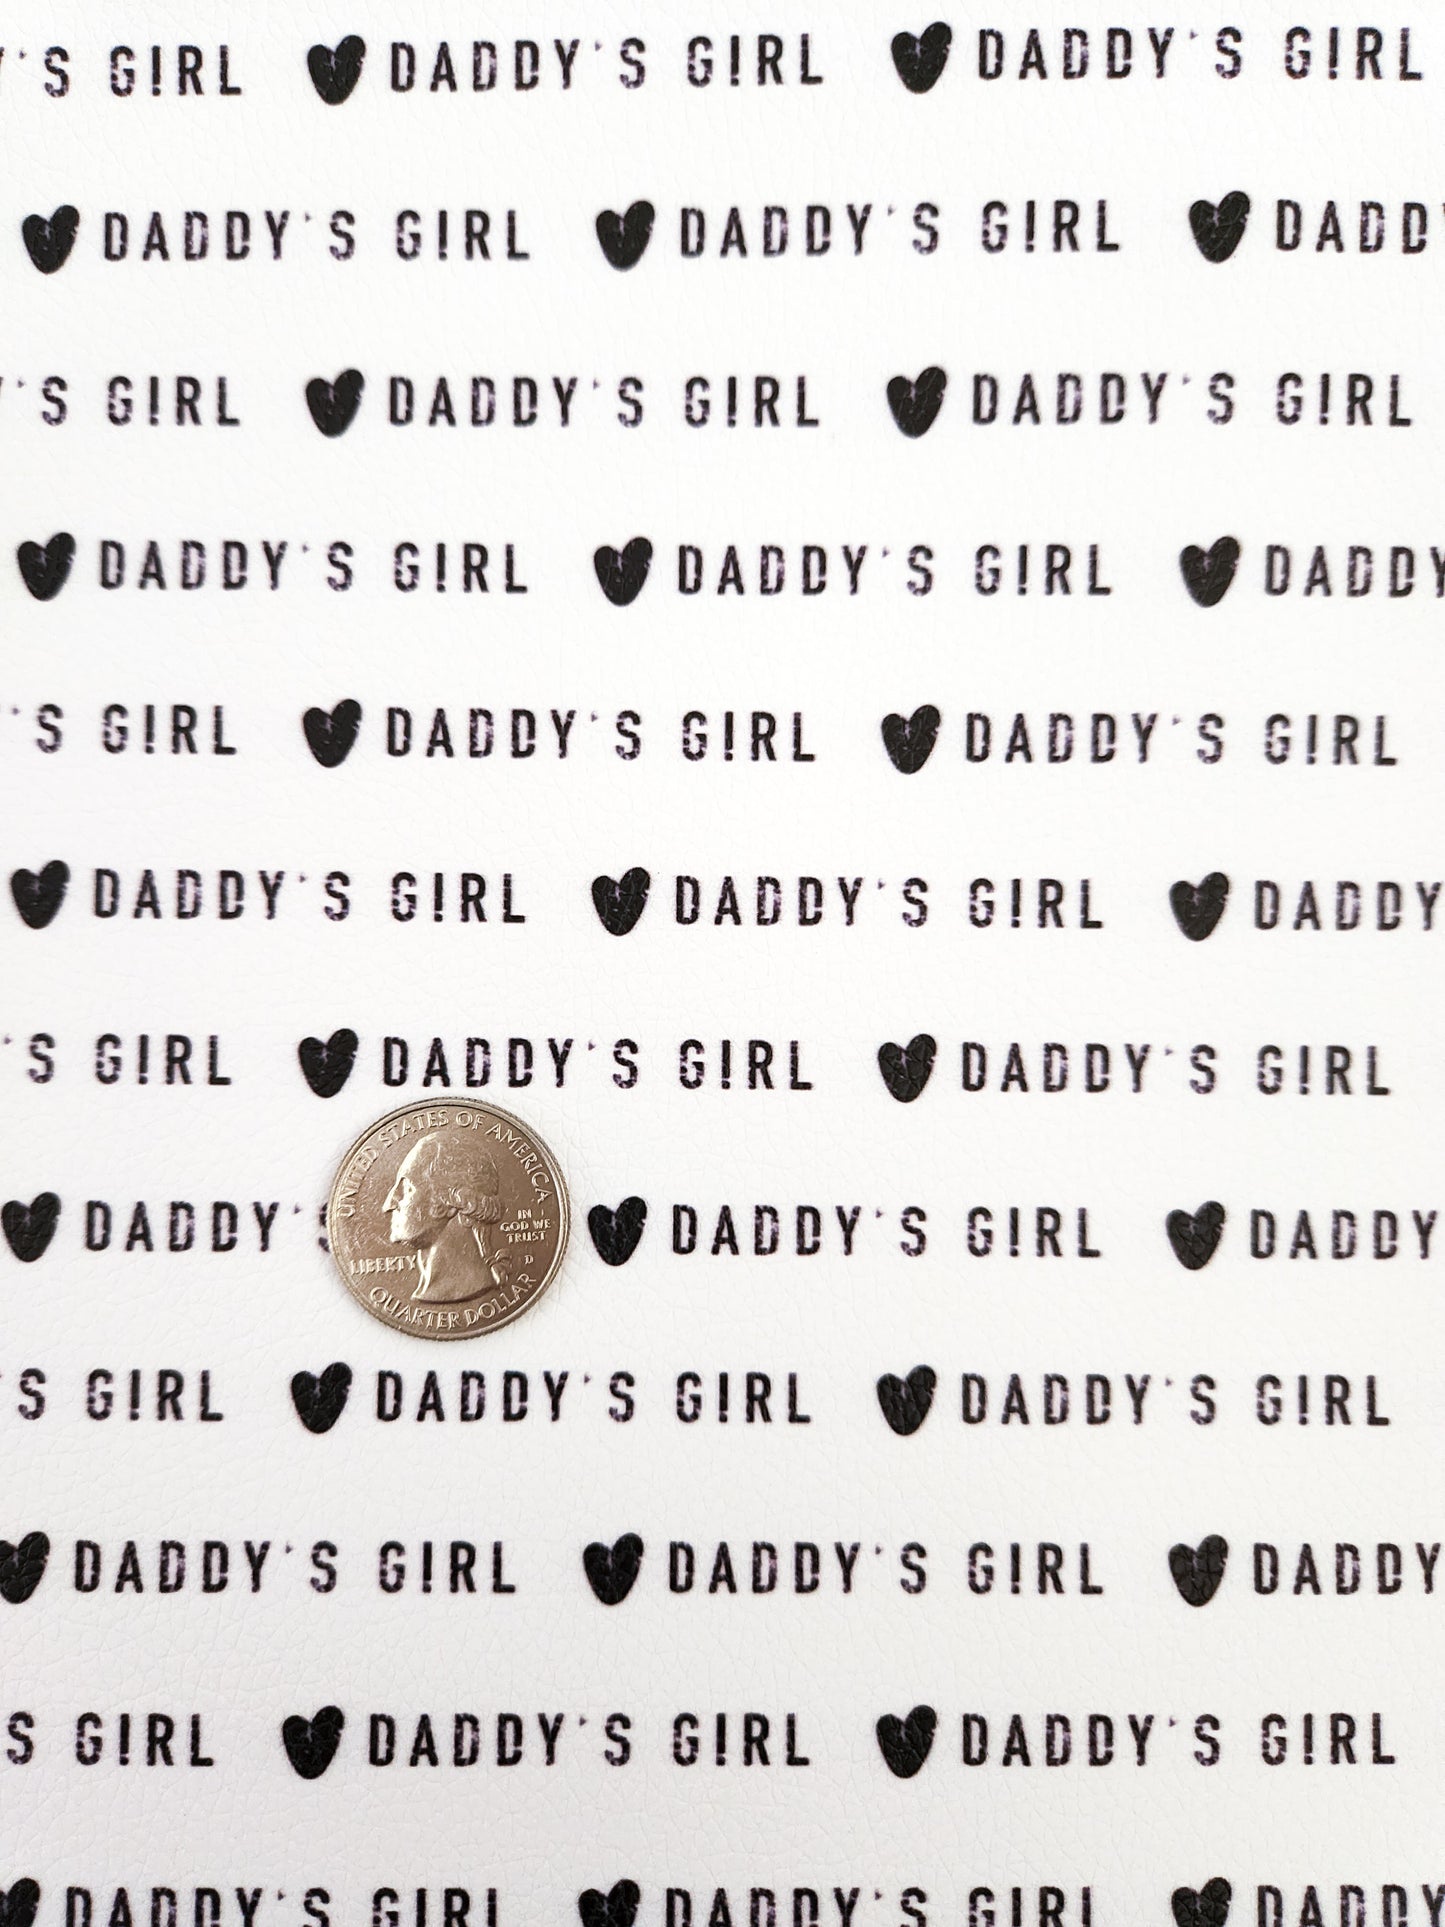 Daddy's Girl 9x12 faux leather sheet